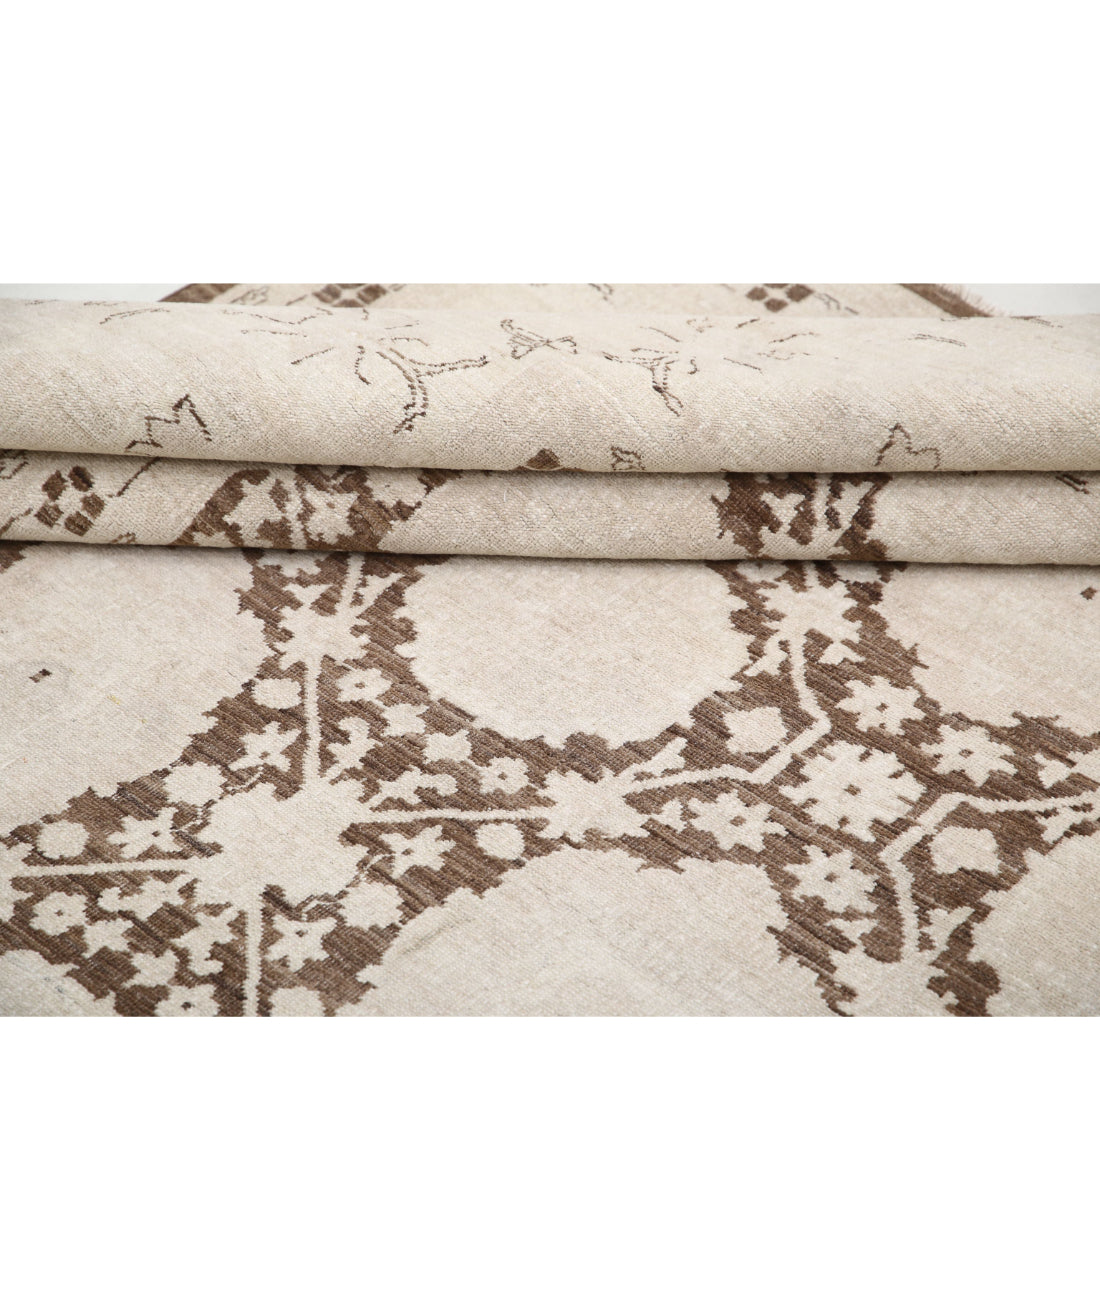 Hand Knotted Serenity Wool Rug - 11'8'' x 14'5'' 11'8'' x 14'5'' (350 X 433) / Brown / Ivory